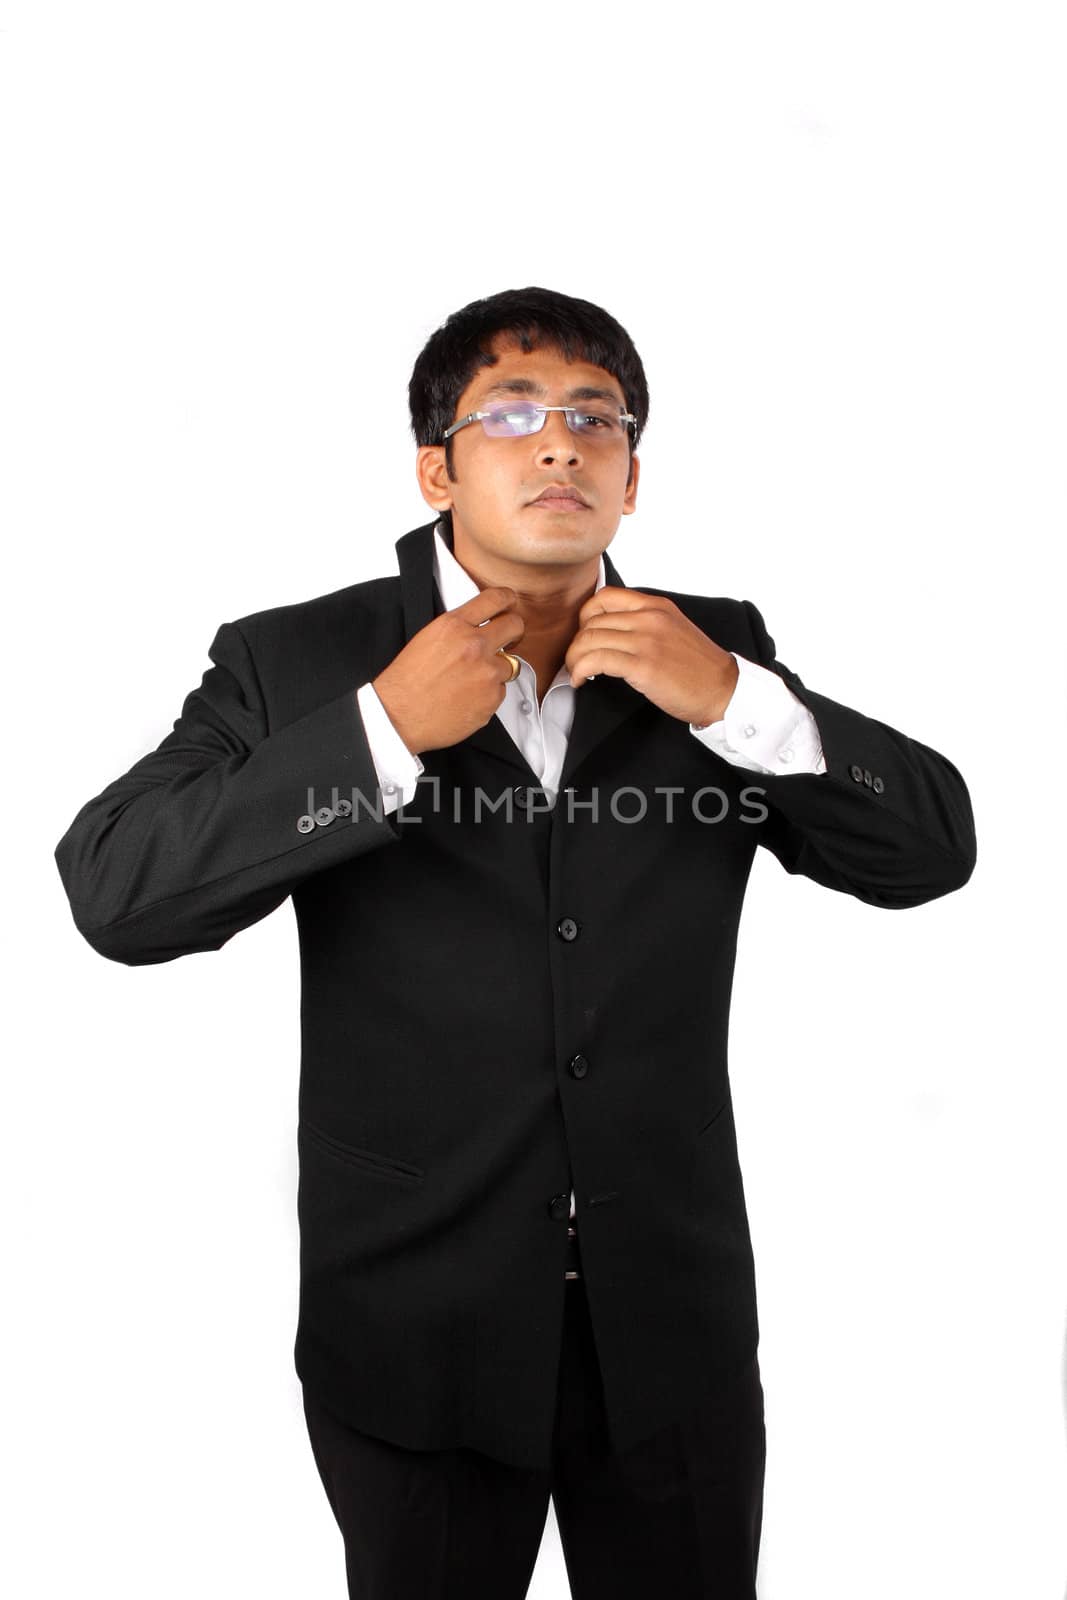 An Indina businessman getting ready, wearing his suit before his office, on white studio background.